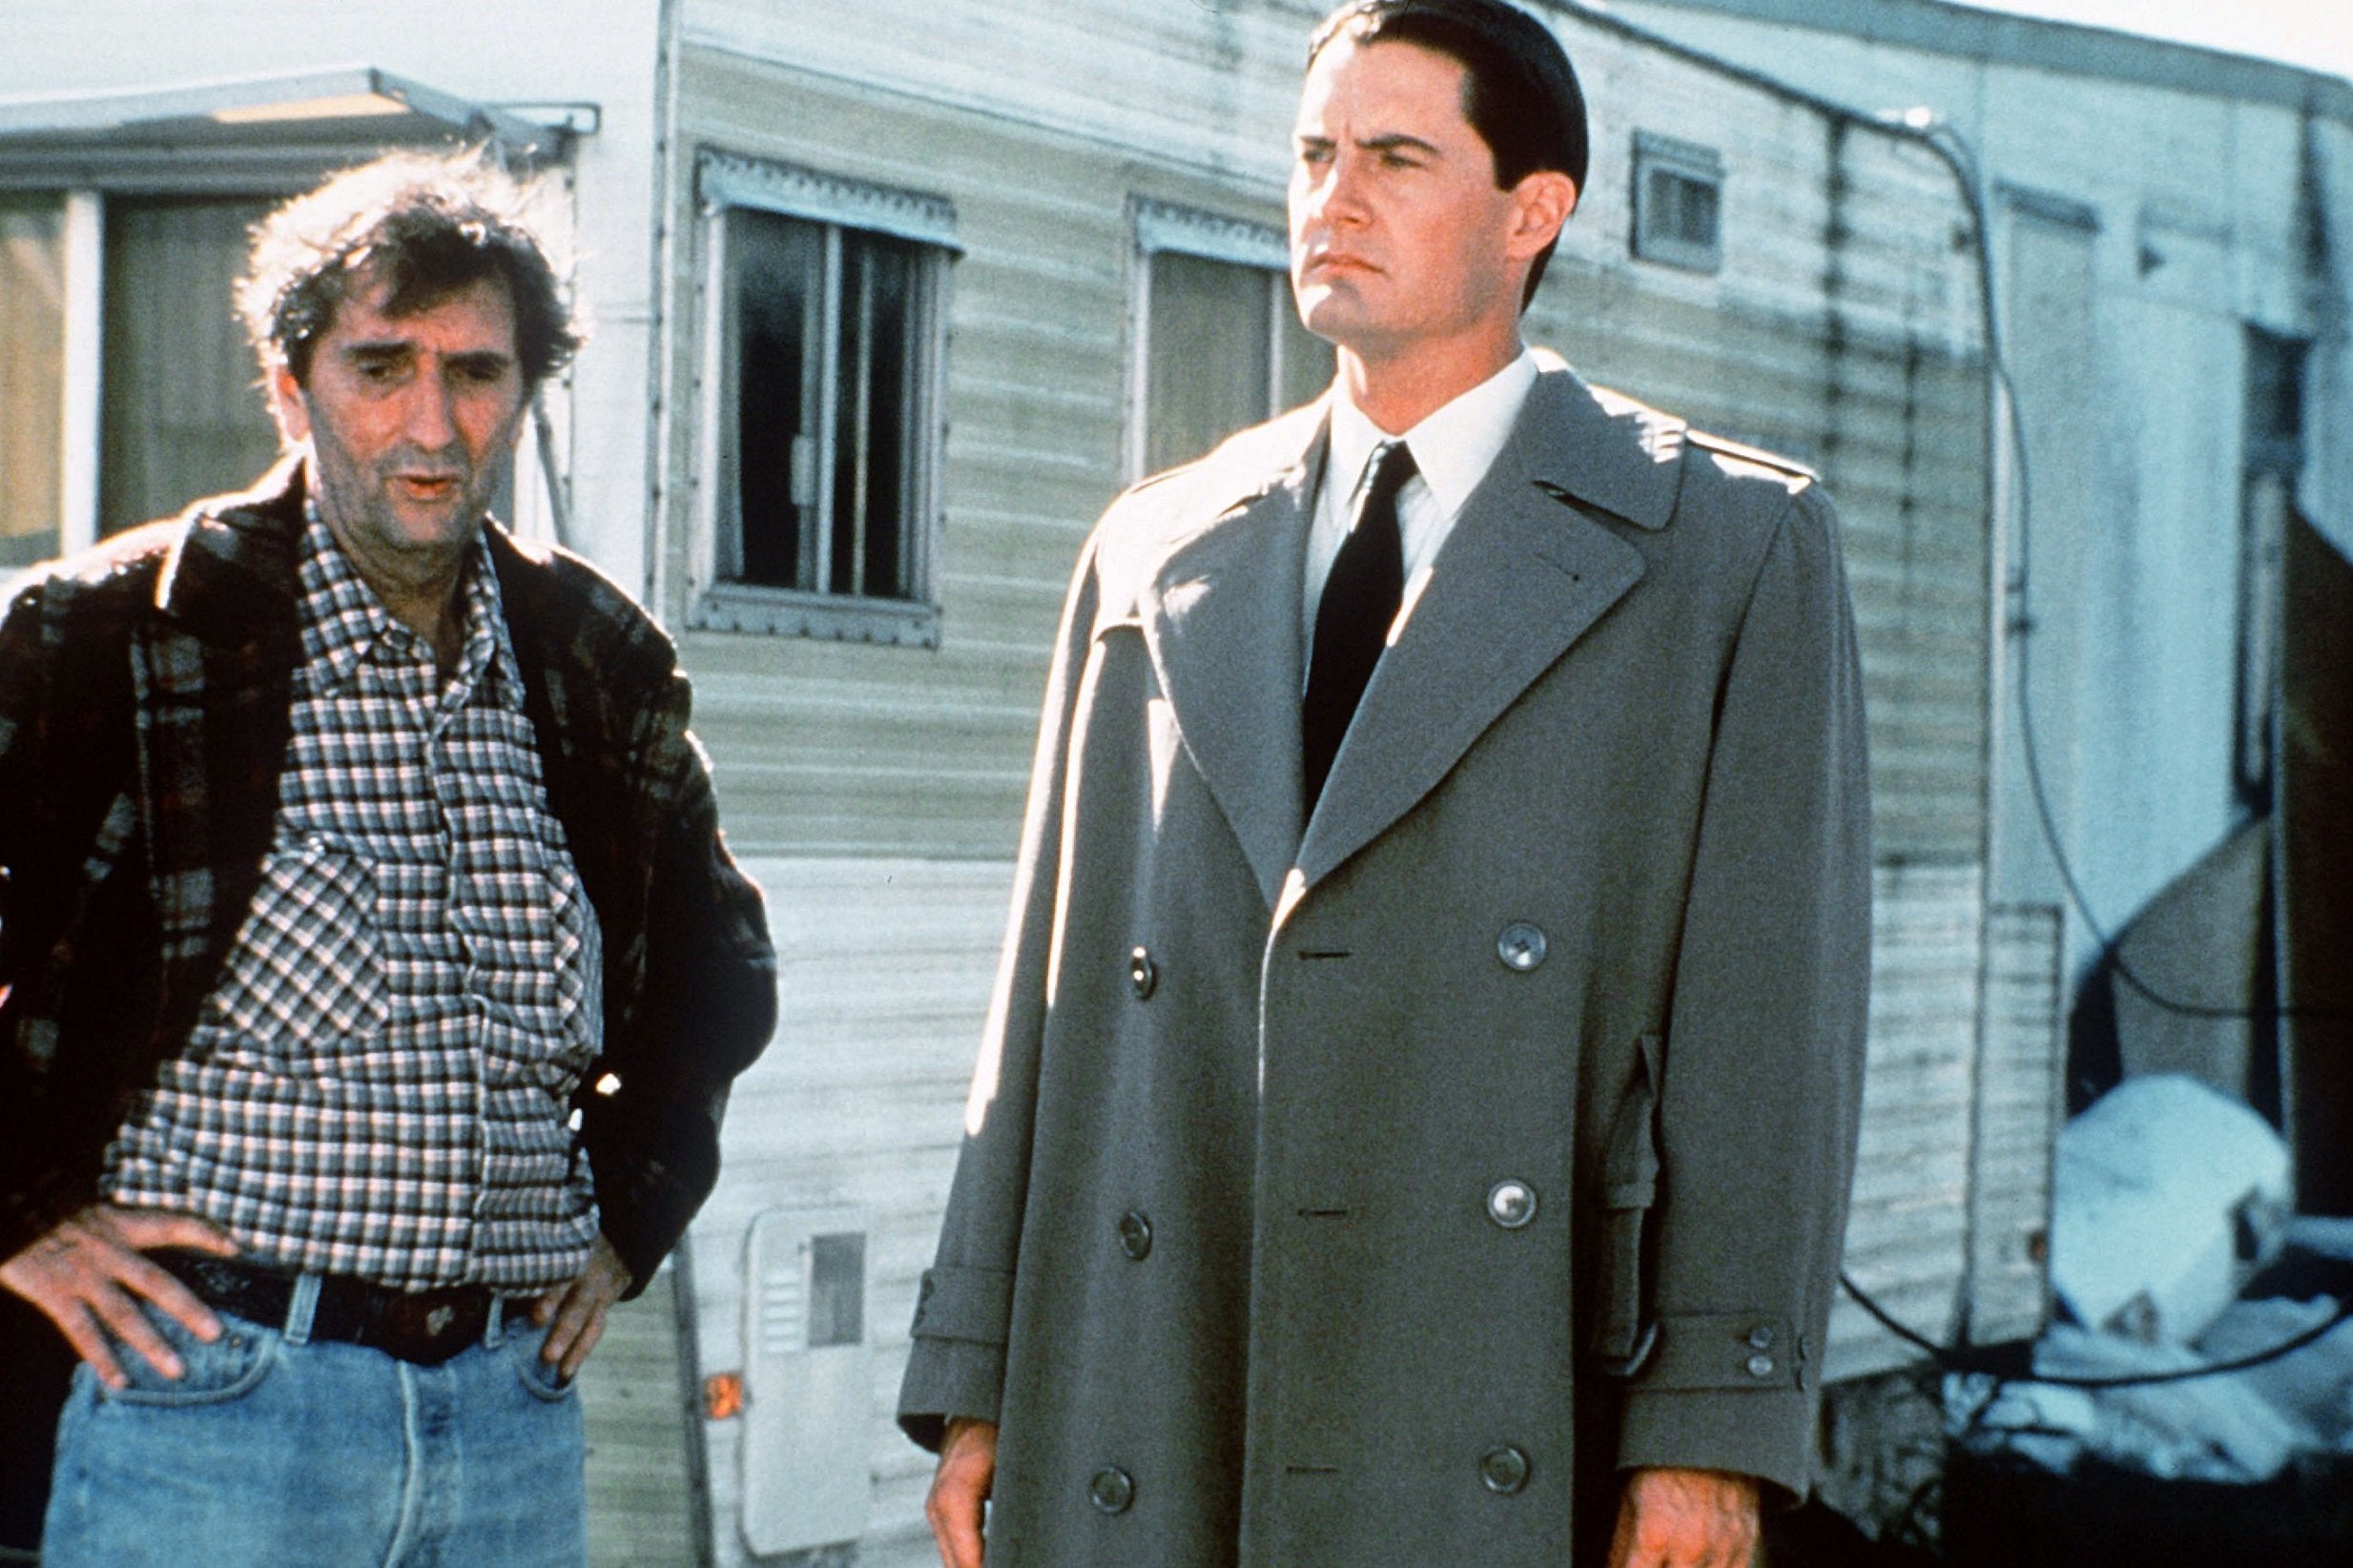 Harry Dean Stanton and Kyle MacLachlan in ‘Fire Walk With Me’ (1992)